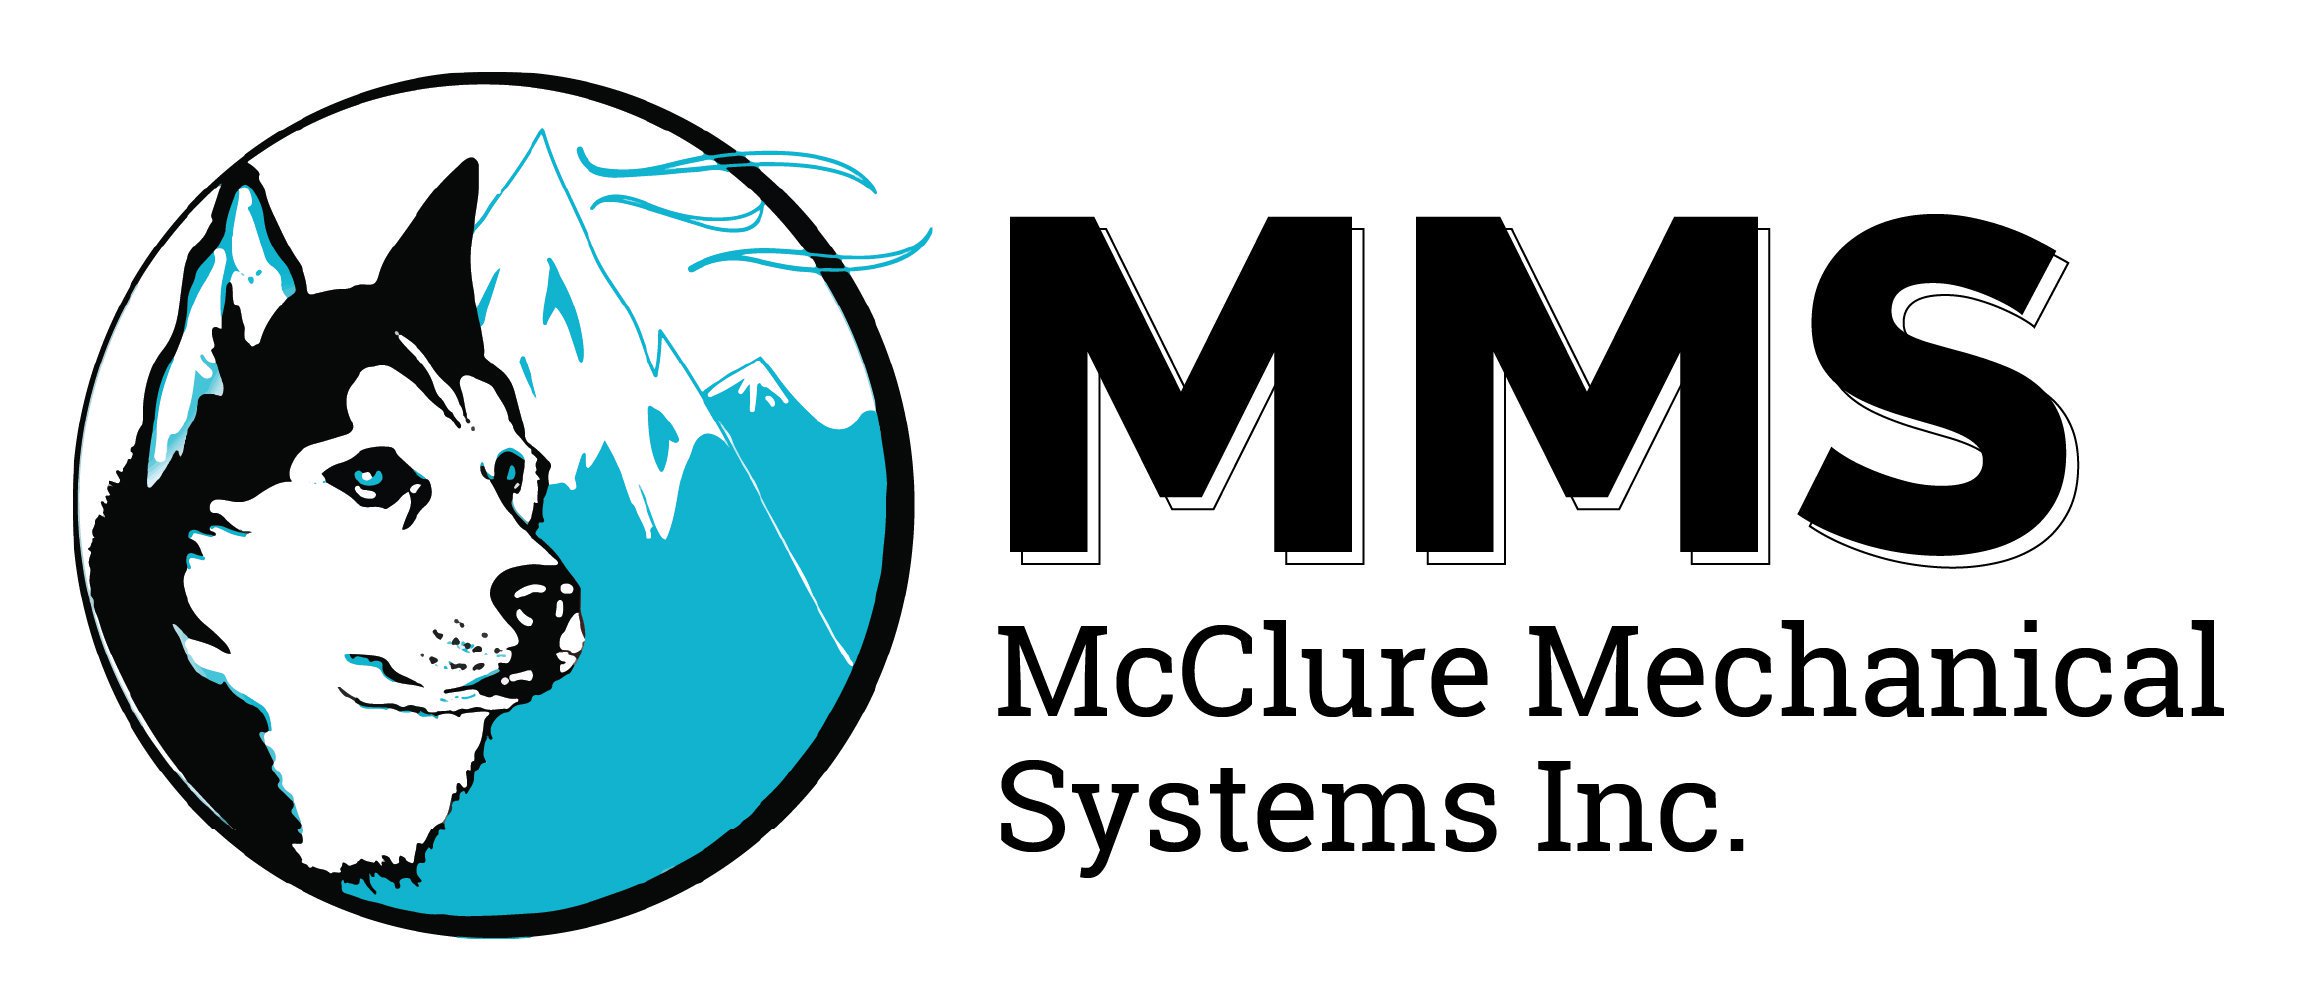 McClure Mechanical Systems, Inc